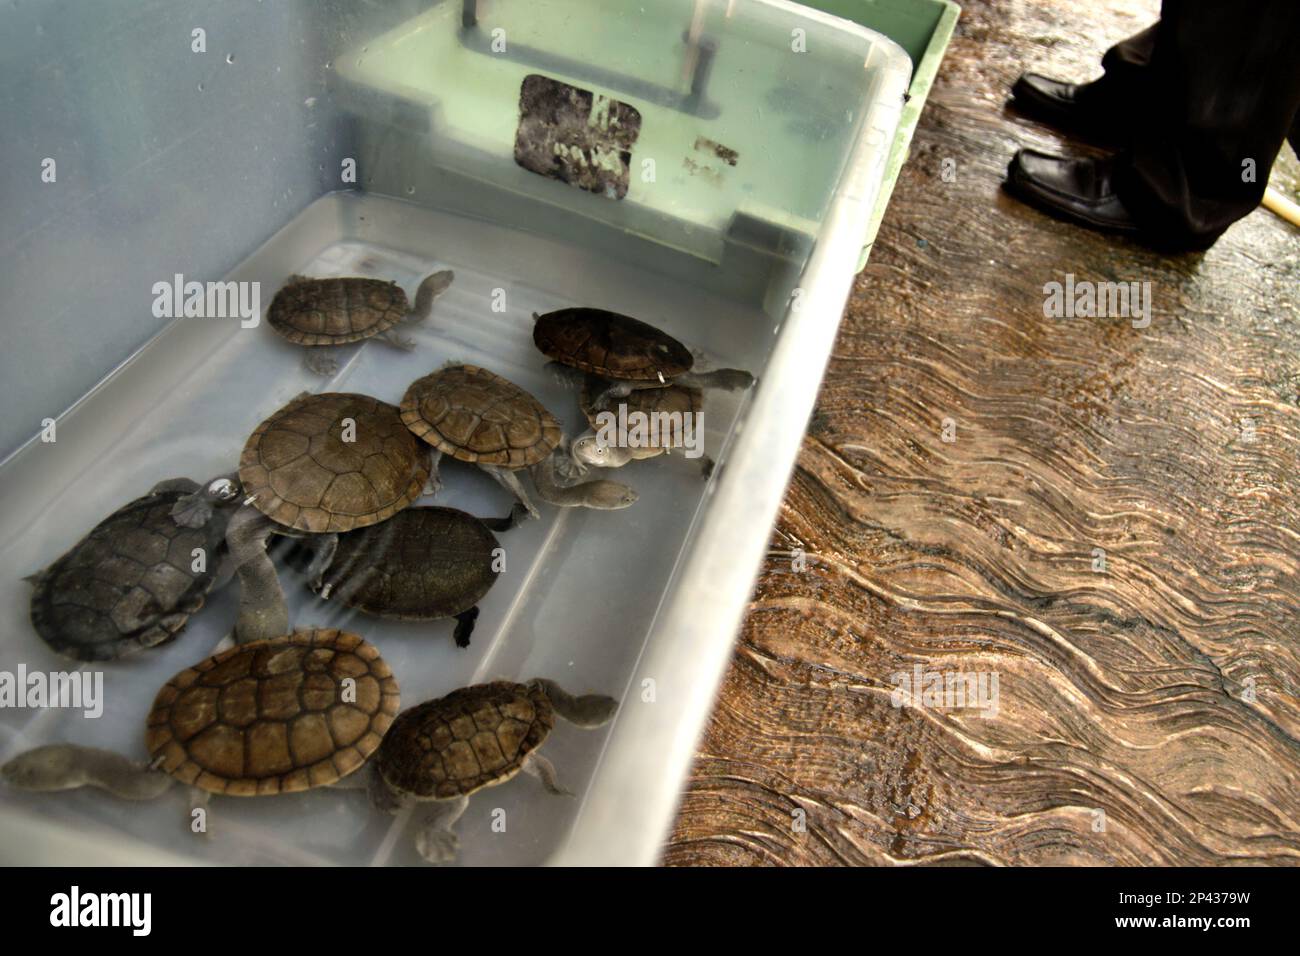 Rare and threatened species of freshwater turtle, the critically endangered Rote Island's endemic snake-necked turtles (Chelodina mccordi) are photographed at a licensed ex-situ breeding farm in Jakarta, Indonesia. Scientific research suggests that reptile richness is likely to decrease significantly across most parts of the world with ongoing future climate change. Stock Photo